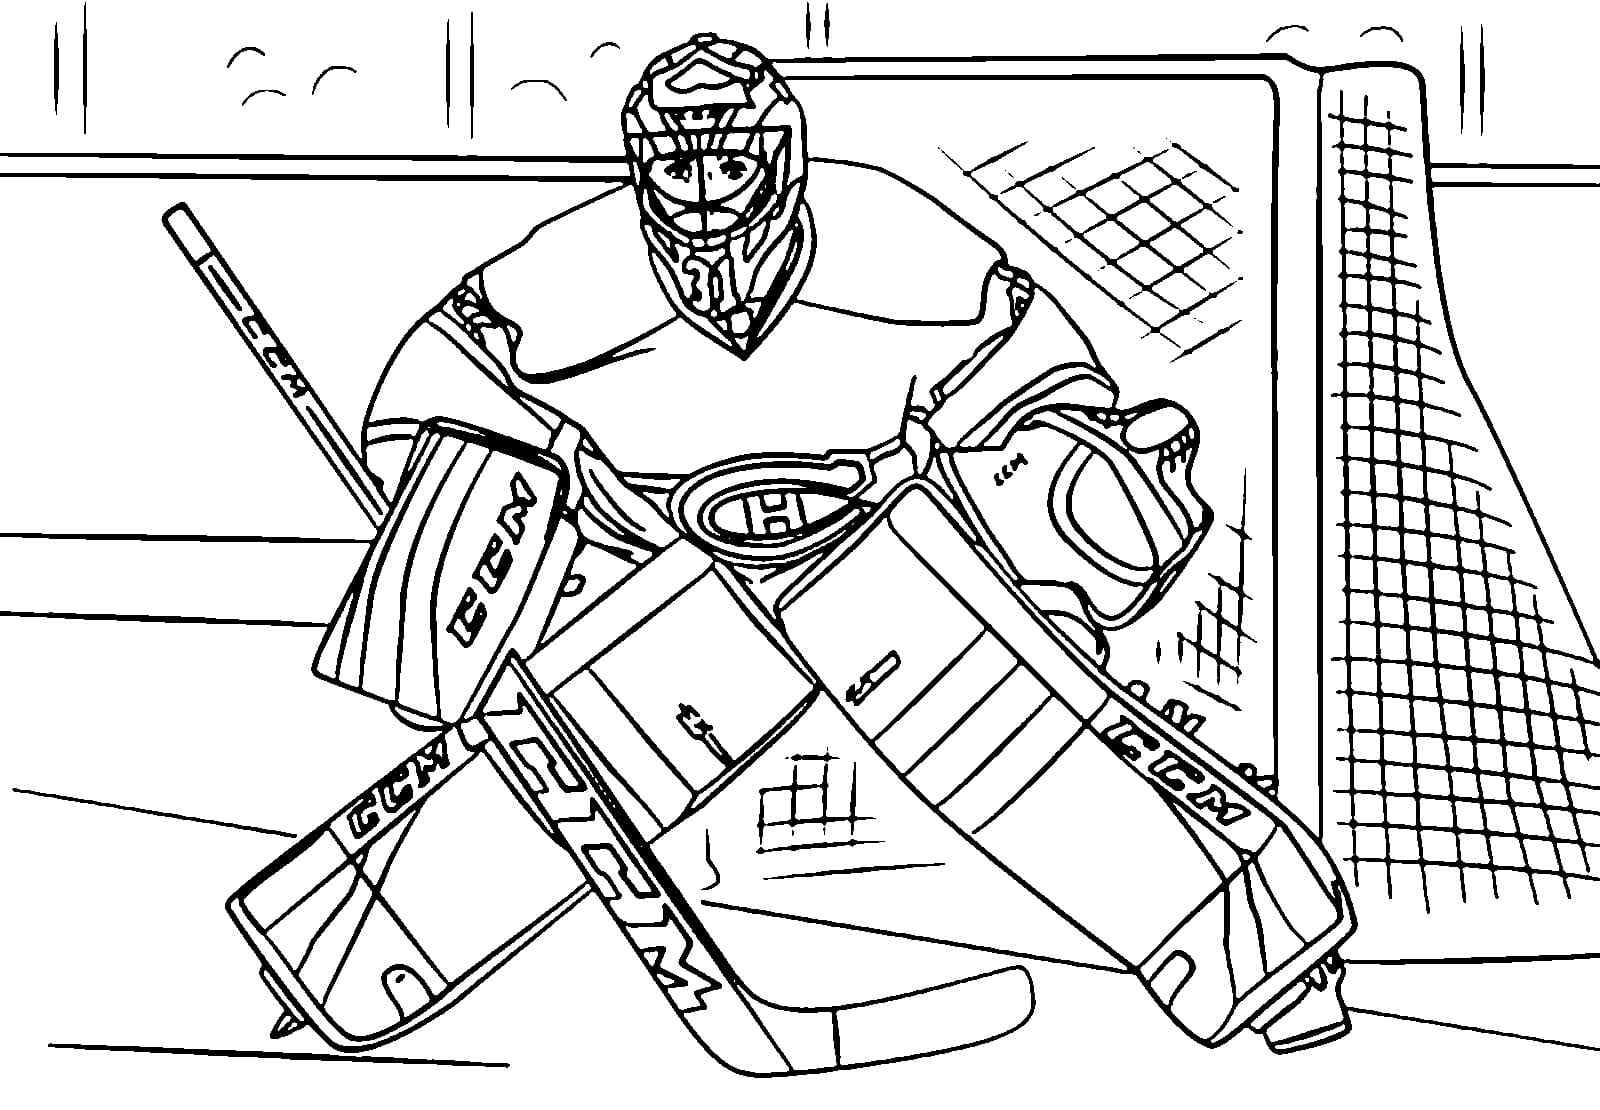 The Goalkeeper’s Main Ability Coloring Page